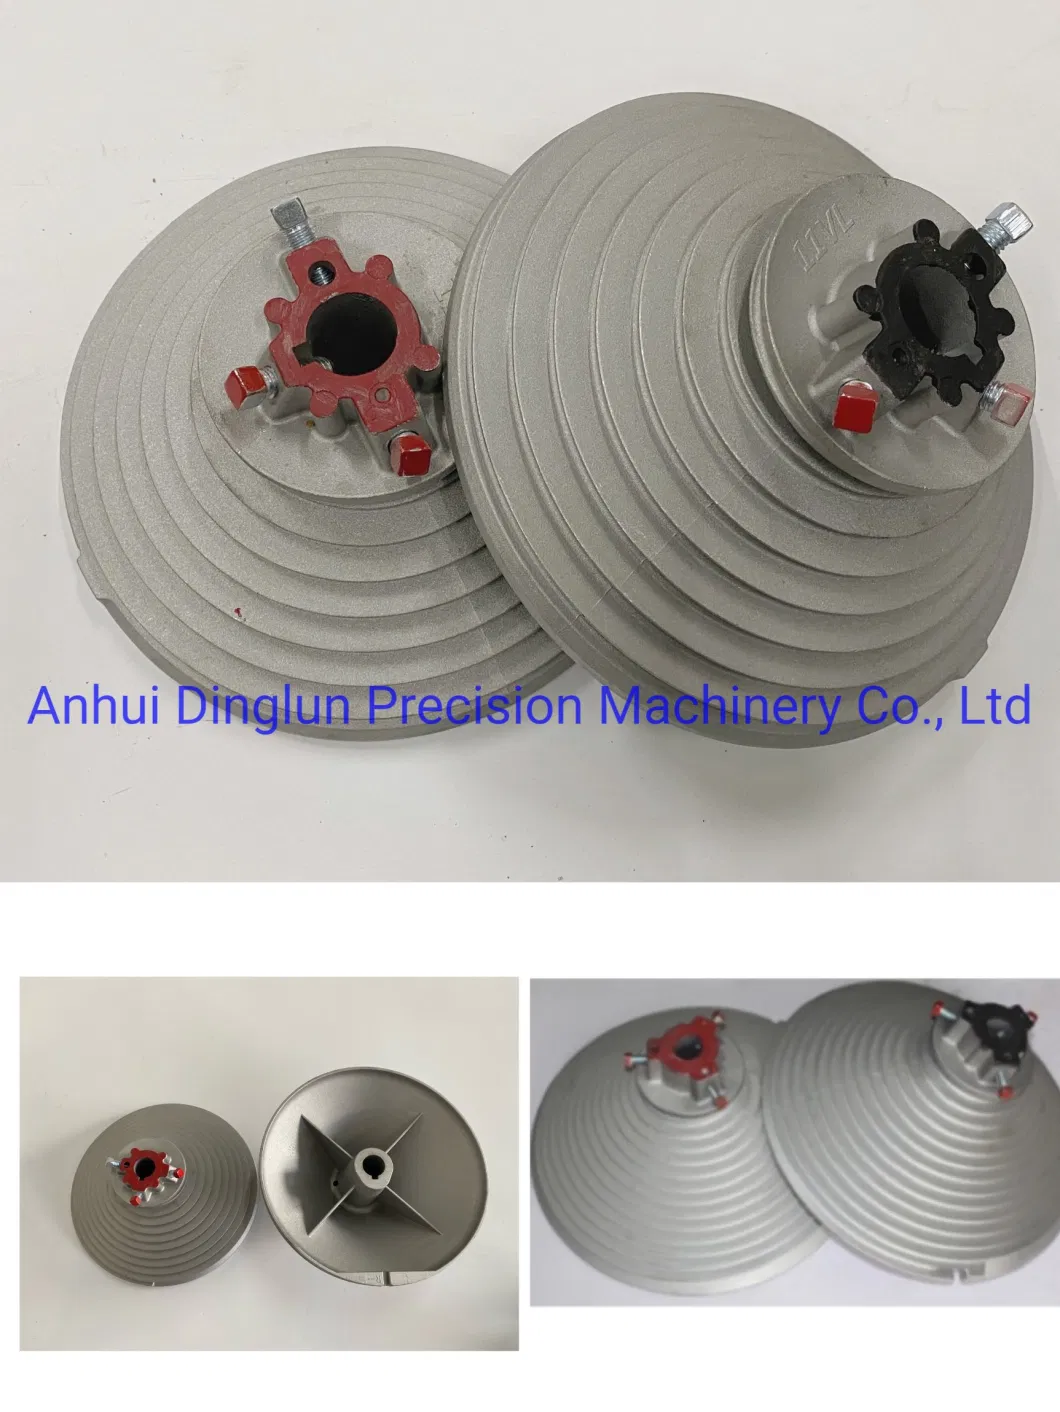 Cable Drum for Garage Door, Spring Fitting Cable Drum